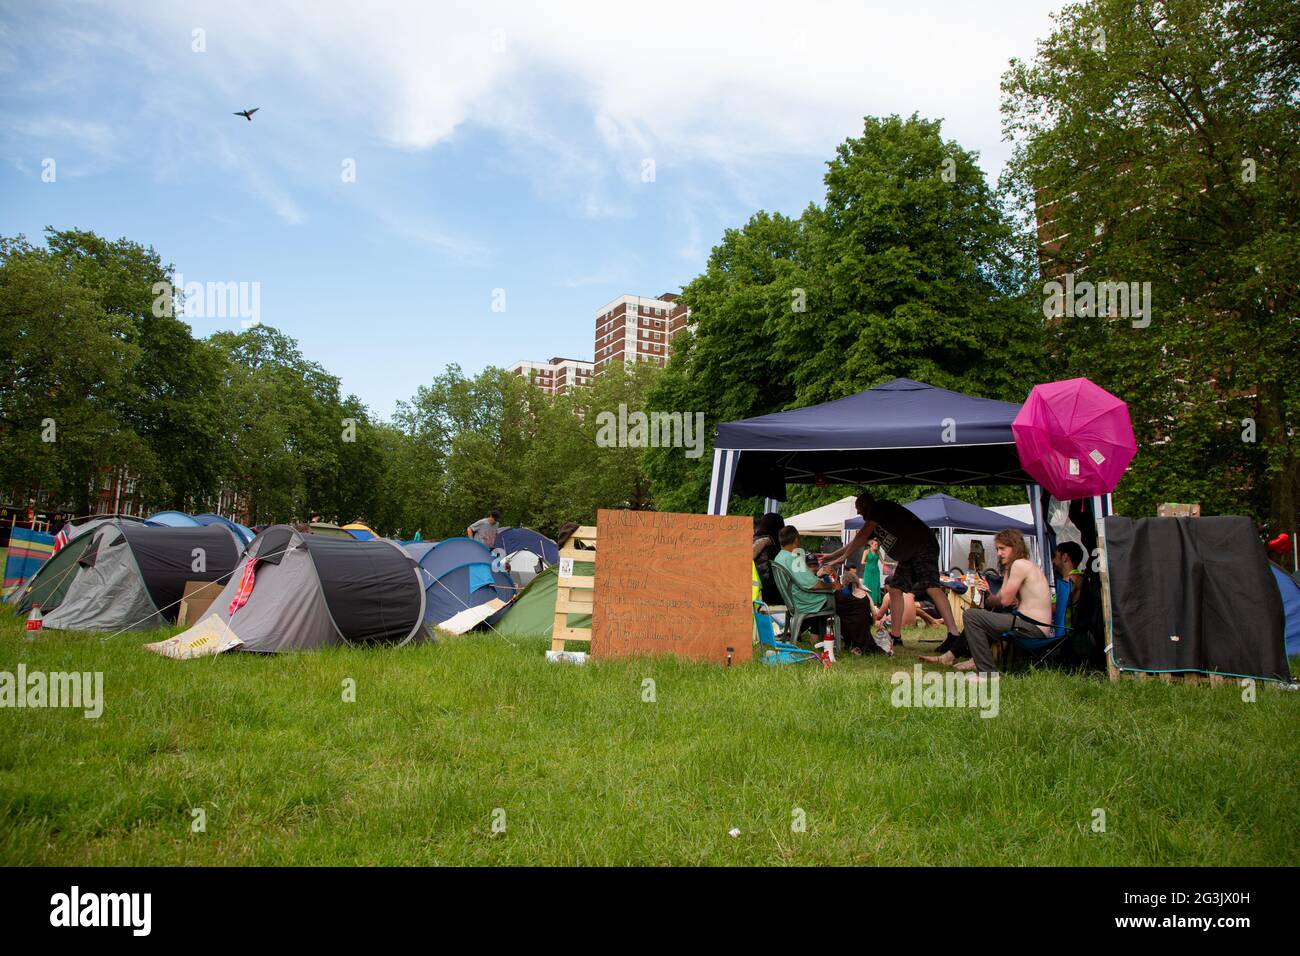 Entrance to the freedom protester camp on Shepherd's Bush Green, London, UK. June 2021 Stock Photo